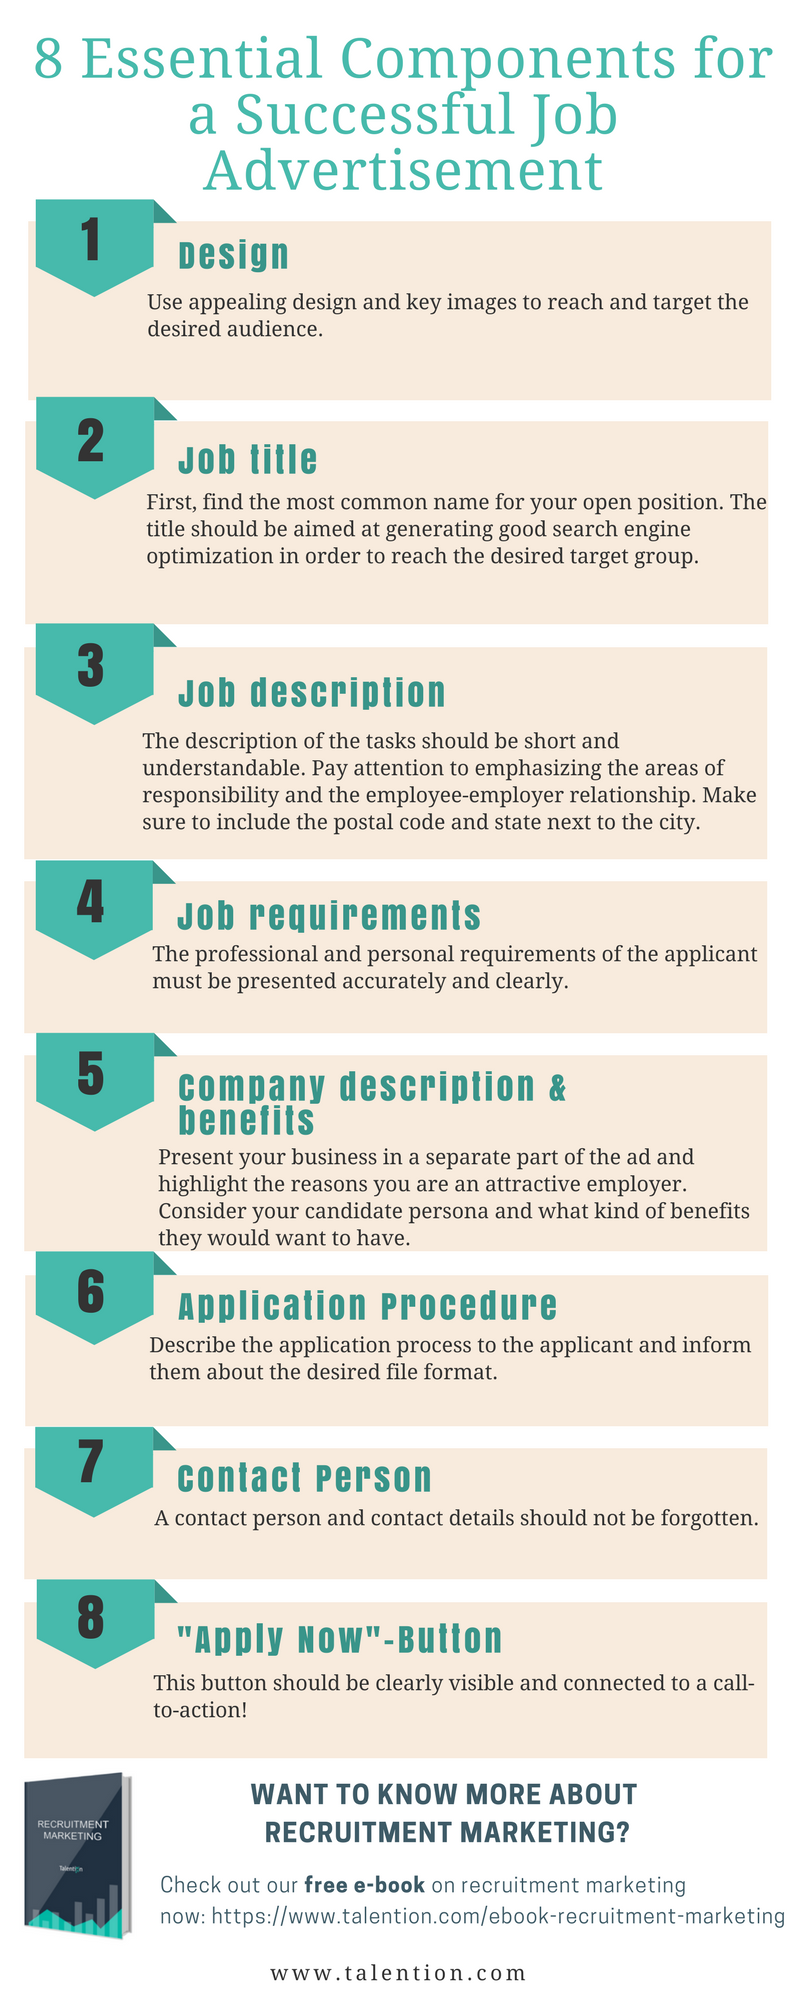 8 Essential Components for a Successful Job Advertisement